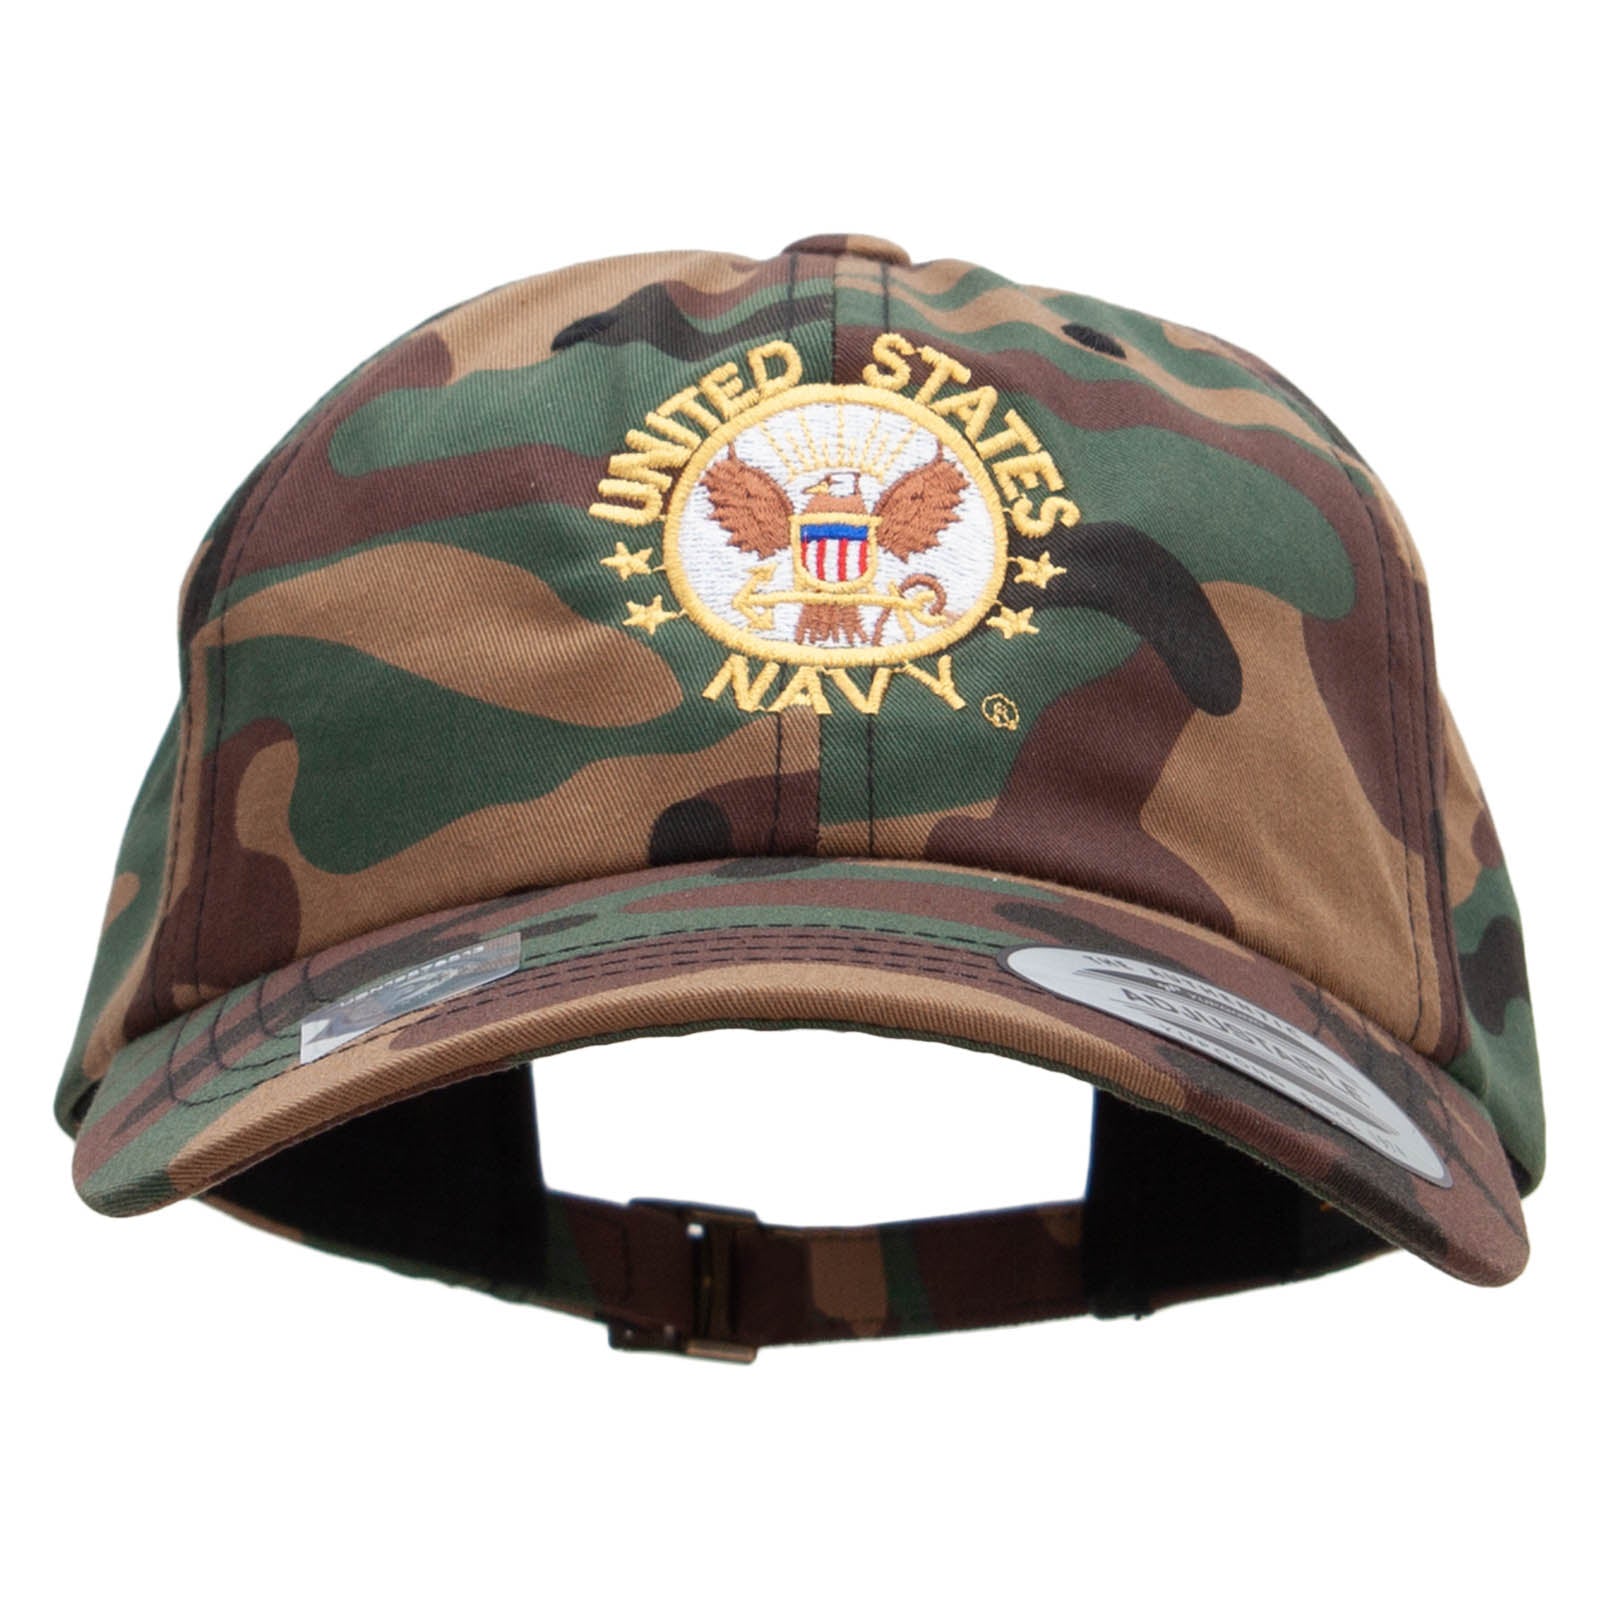 Licensed United States Navy Circle Emblem Unstructured Low Profile 6 panel Cotton Cap - Green Camo OSFM